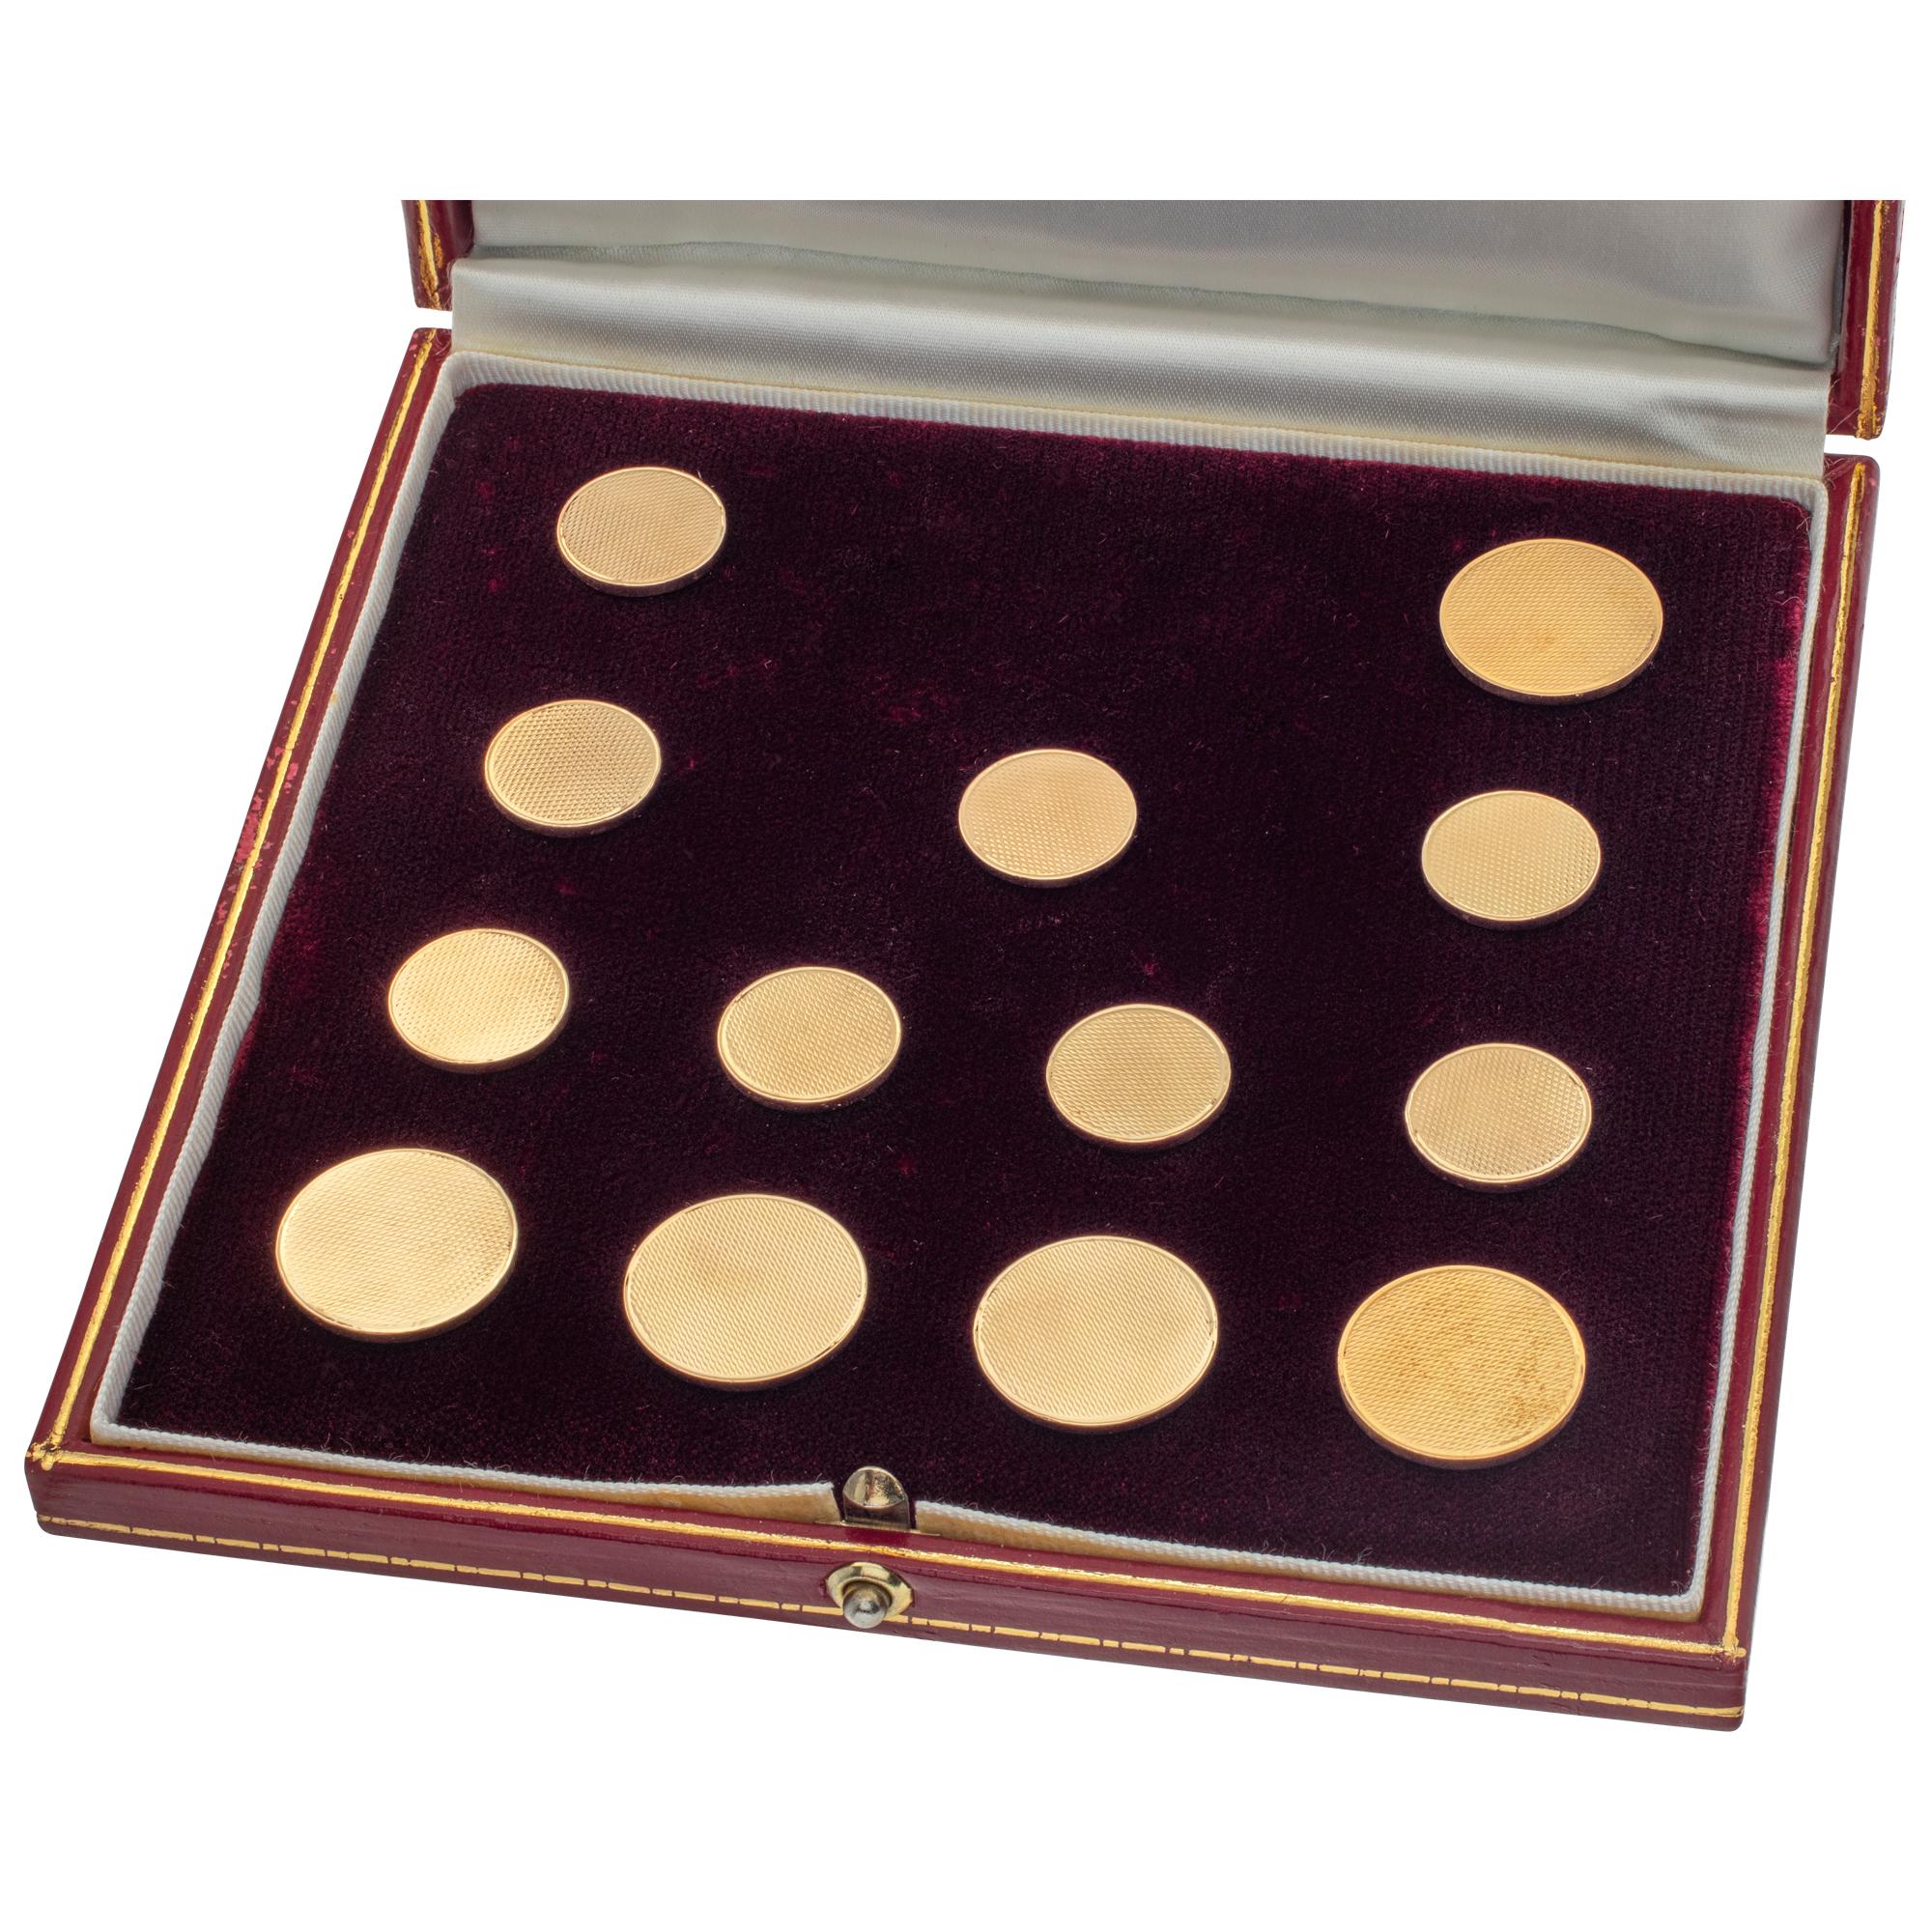 Asprey London 18k yellow gold blazer buttons (13 total count). Kick your jacket up to Regal! Comes with eight 15mm cufflink buttons in 18k yellow gold (four for each cuff), and five 20mm buttons for center jacket in 18k yellow gold. Complete with